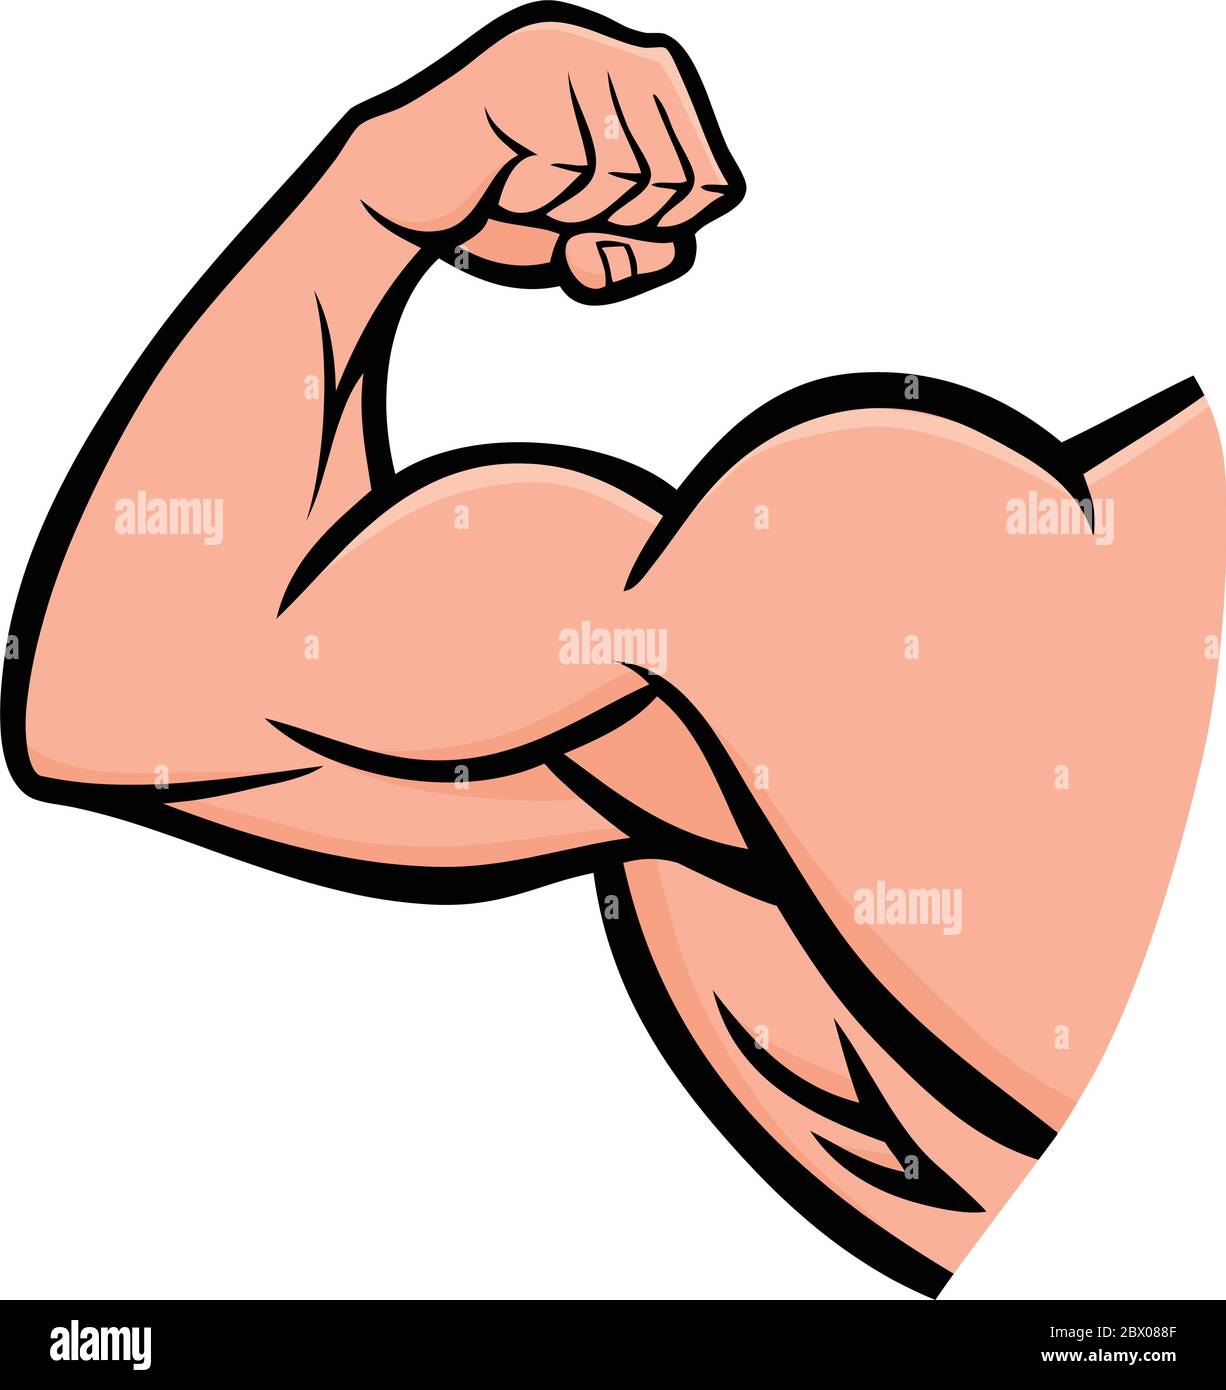 https://c8.alamy.com/comp/2BX088F/strong-arm-an-illustration-of-a-strong-arm-2BX088F.jpg